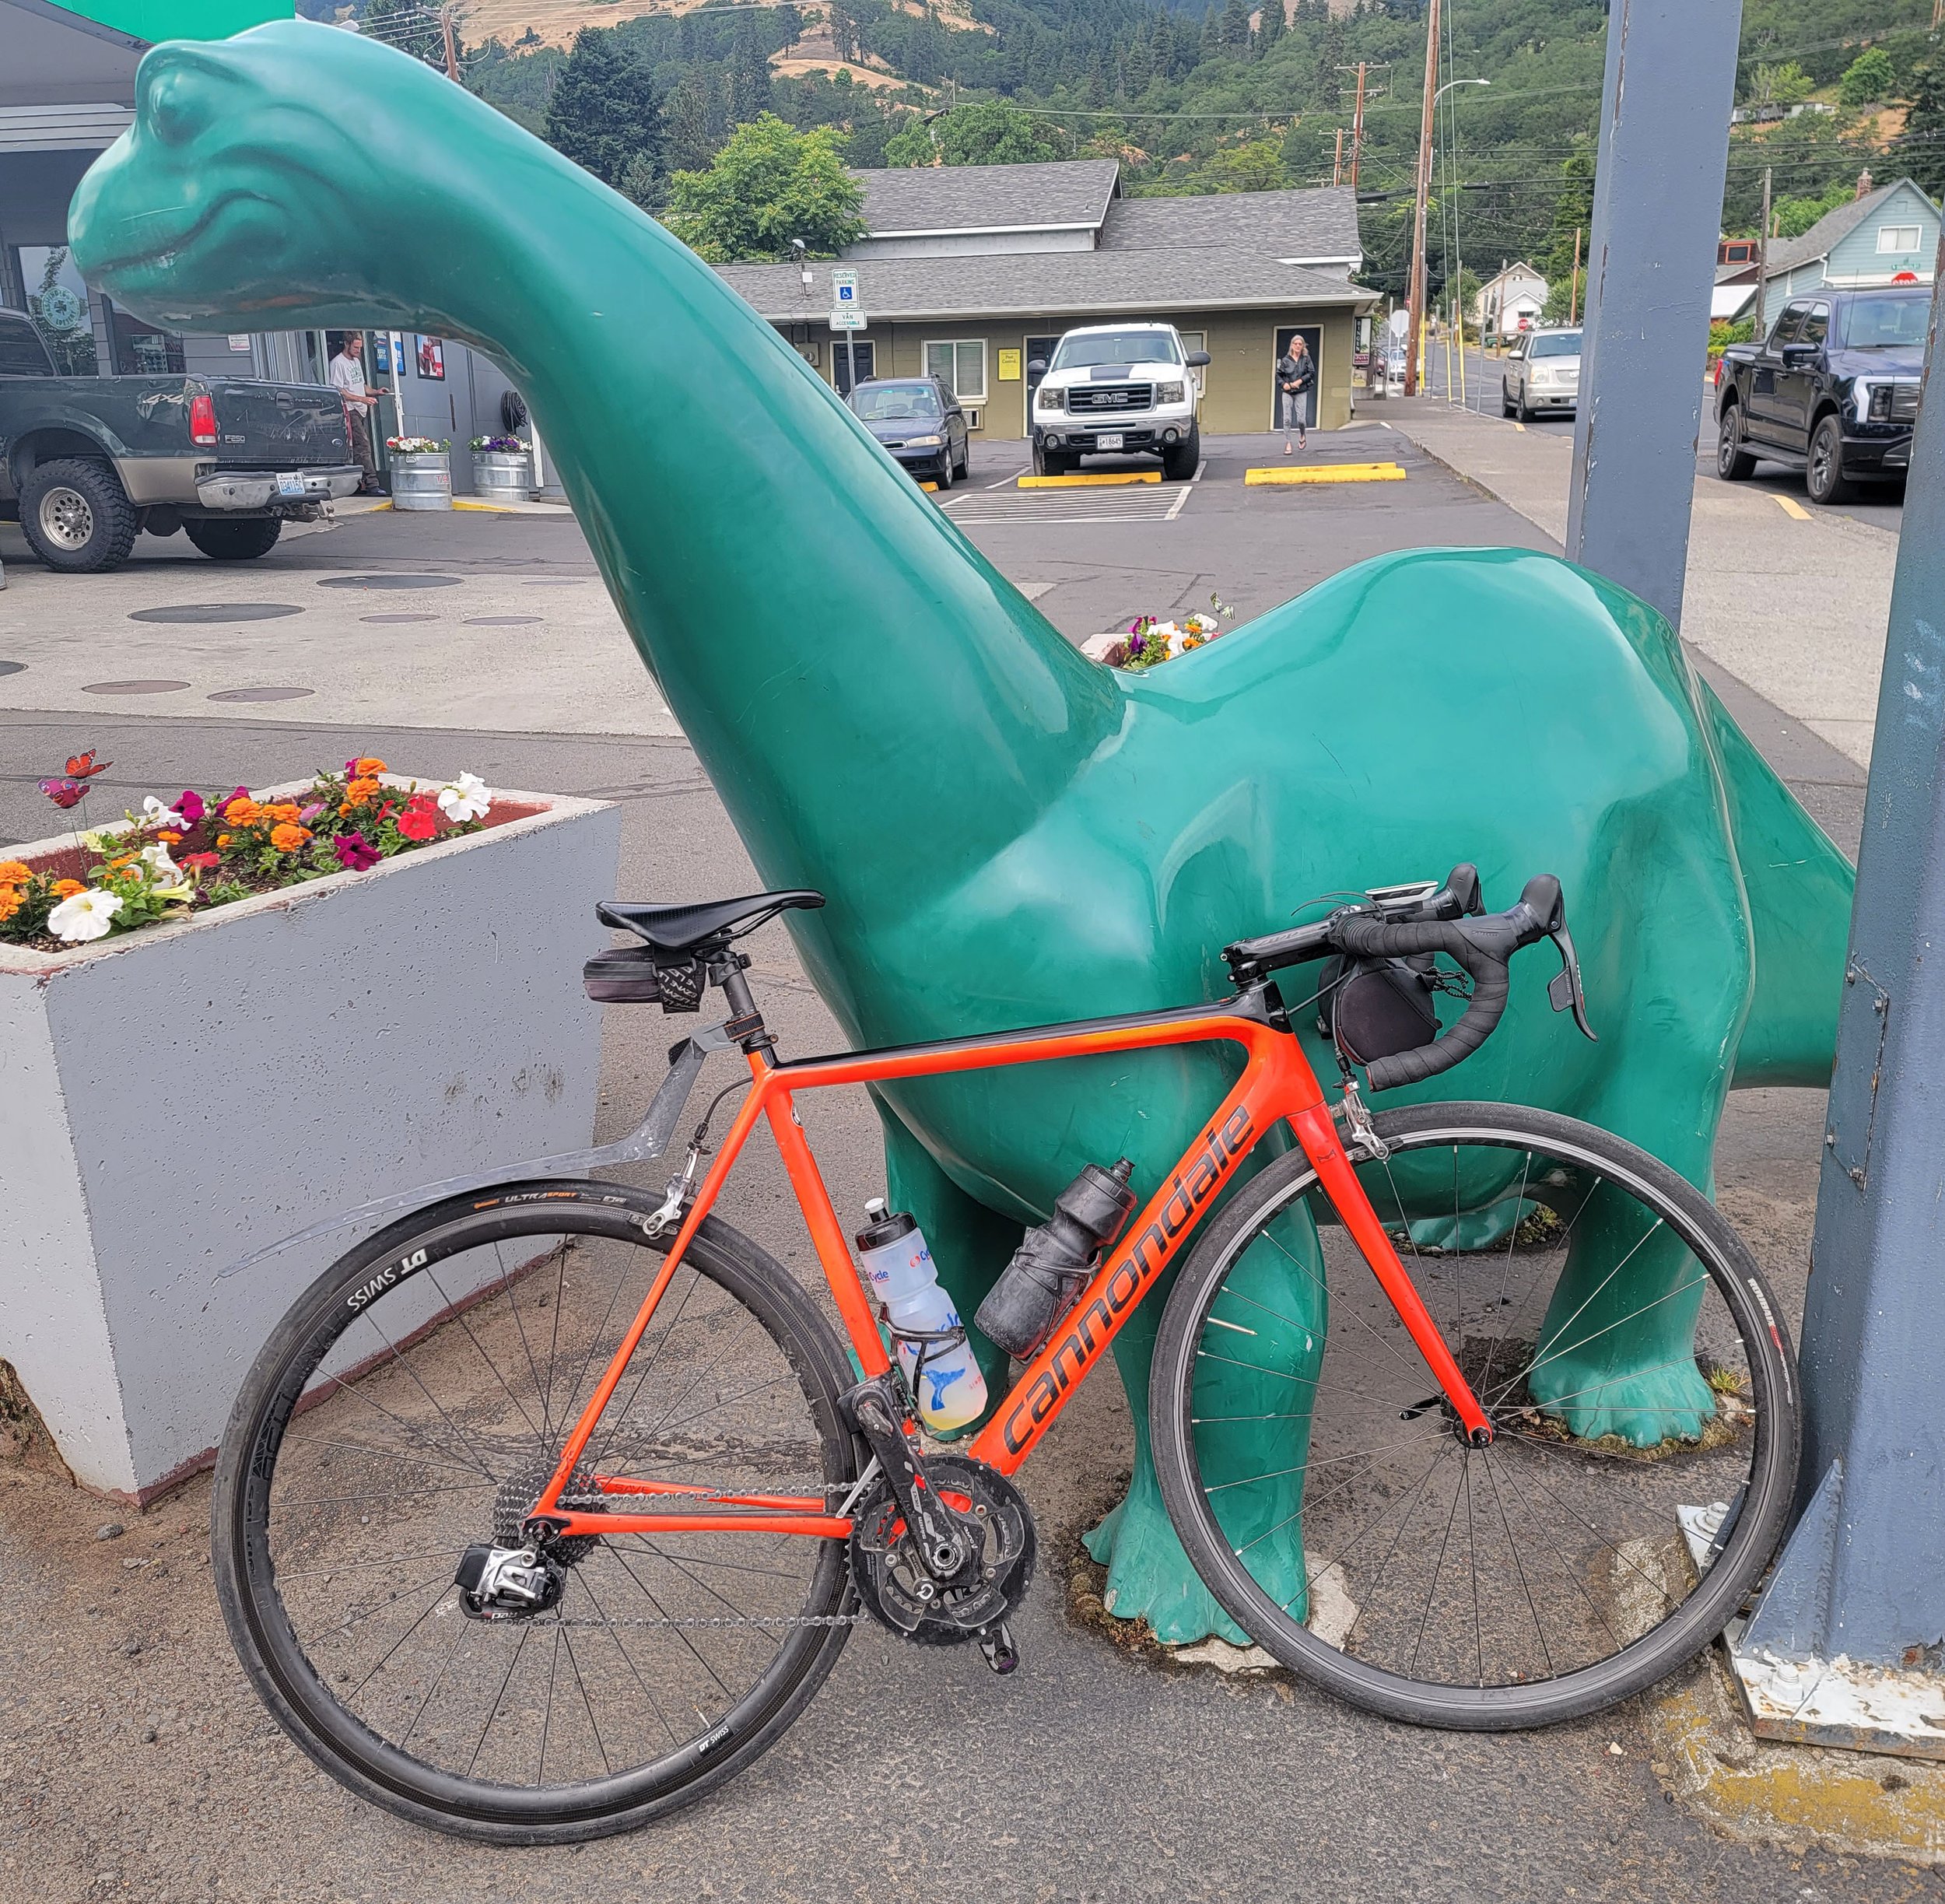  My friendly dino friend at Sinclair gas station. 18km to go… The Skittles were delicious. 